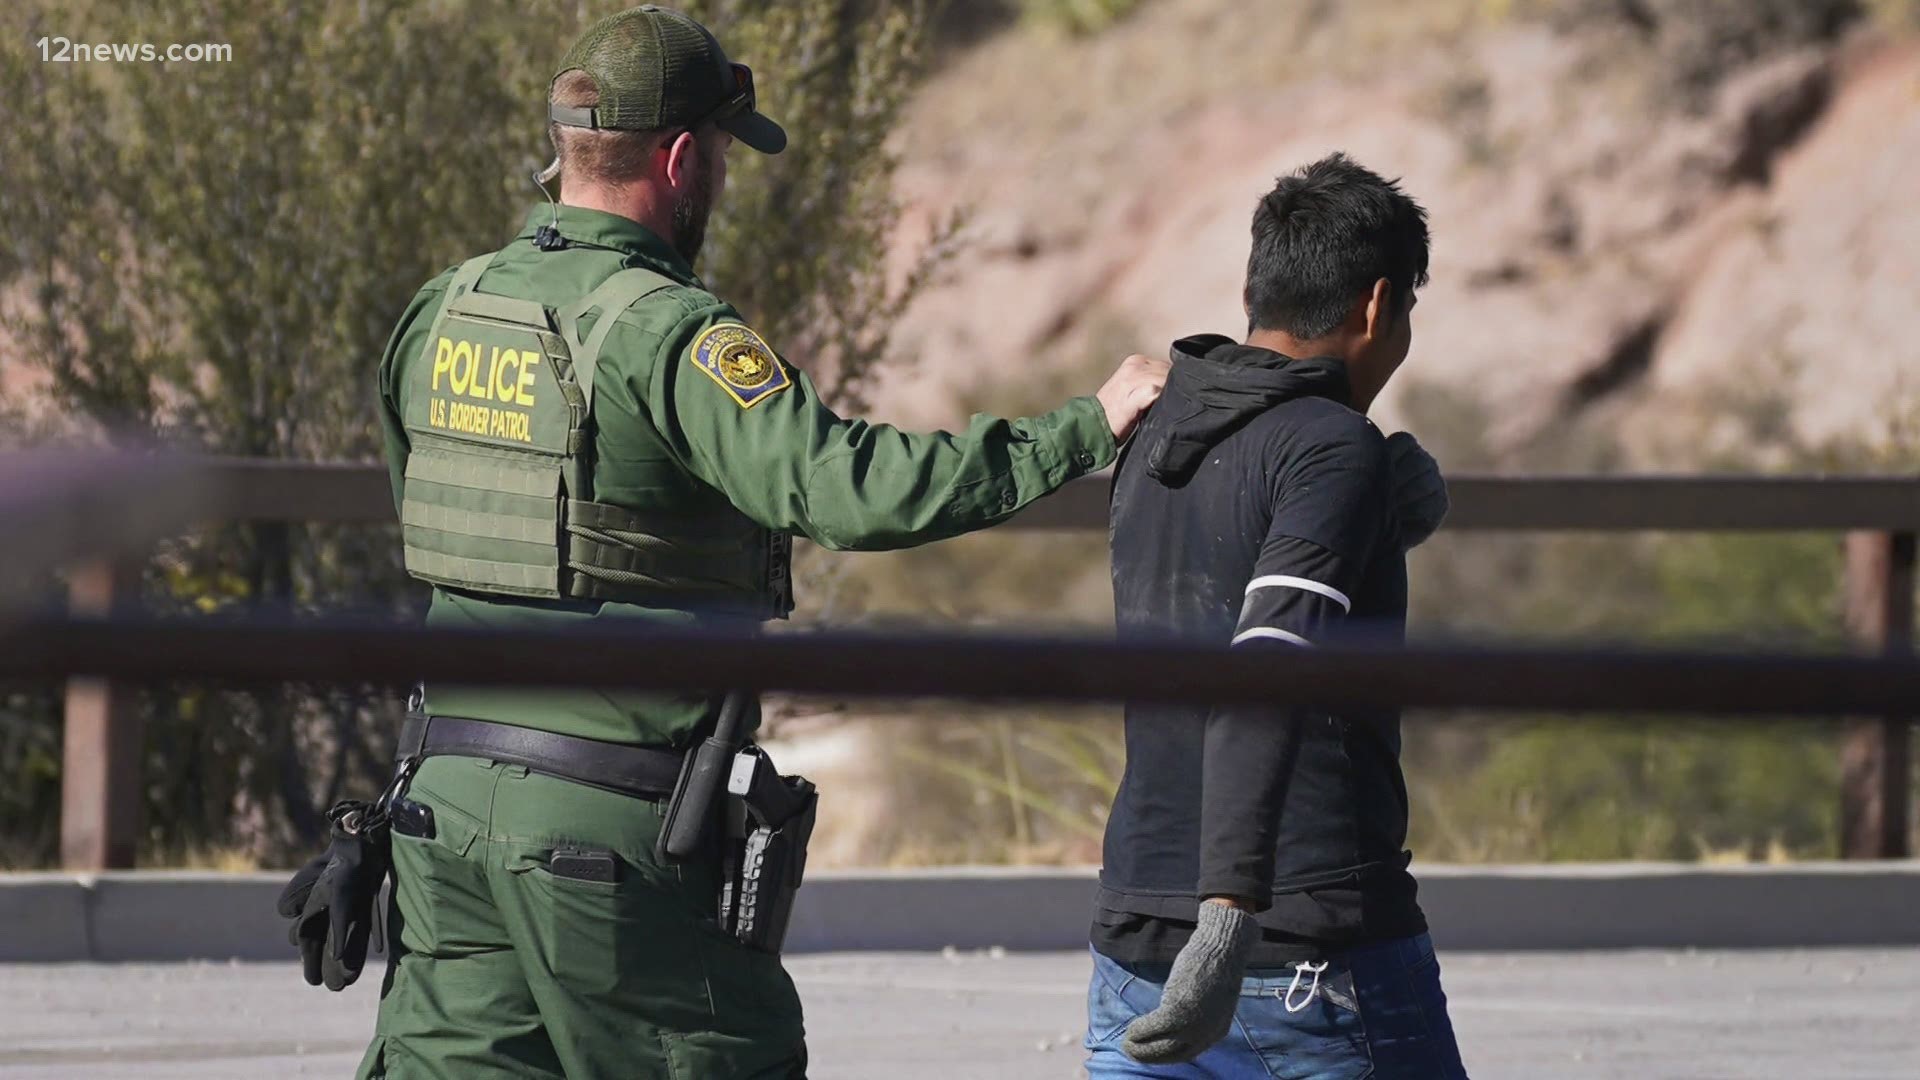 The number of migrants at the U.S.-Mexico border continues to surge. Some Arizona sectors have seen activity nearly double over the last month.